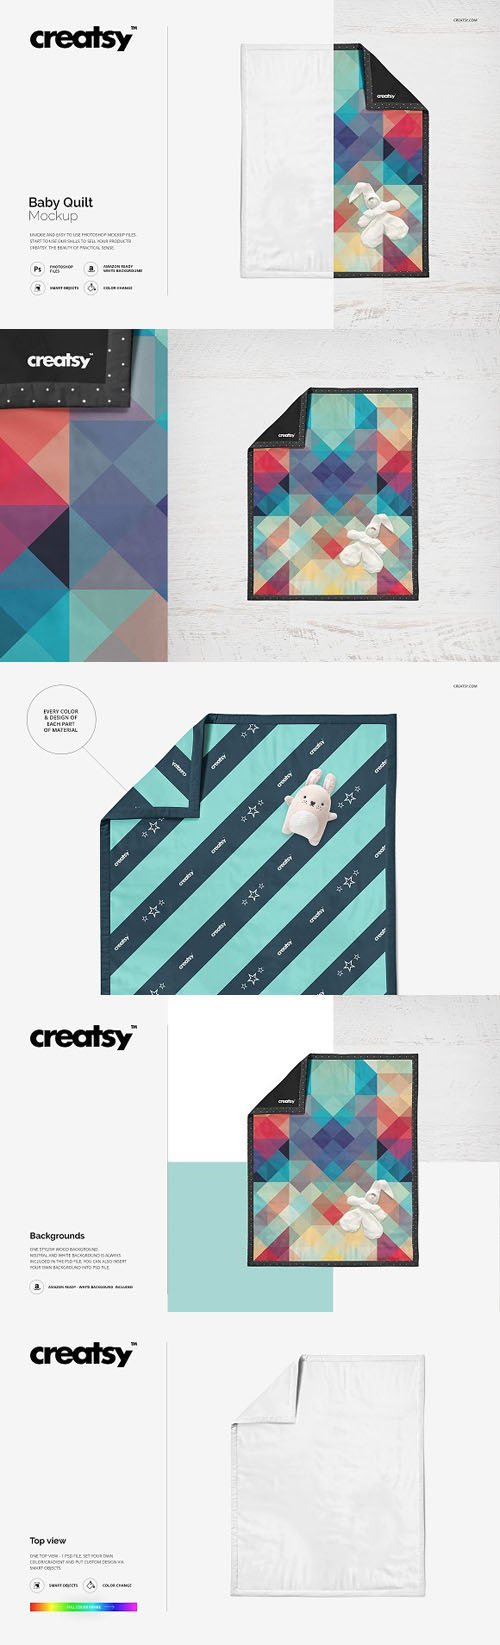 Baby Quilt Mockup 1633585